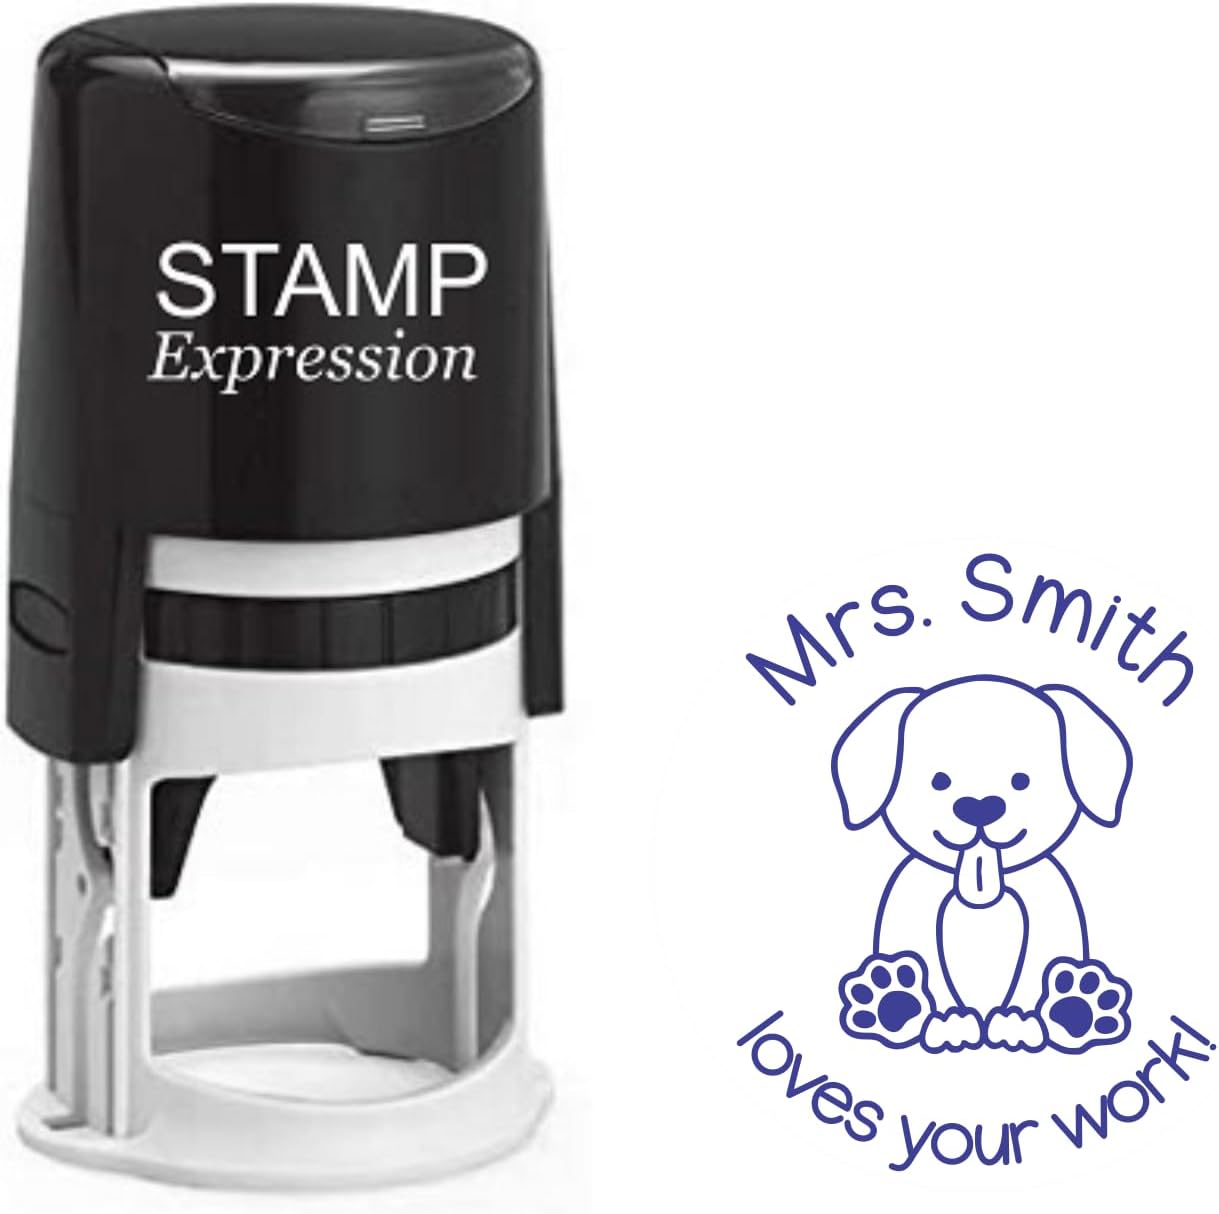 Loves Your Work with a Cute Puppy Teacher Custom Stamp - Self Inking. Personalized Rubber Stamp with Lines of Text (SH-76208)